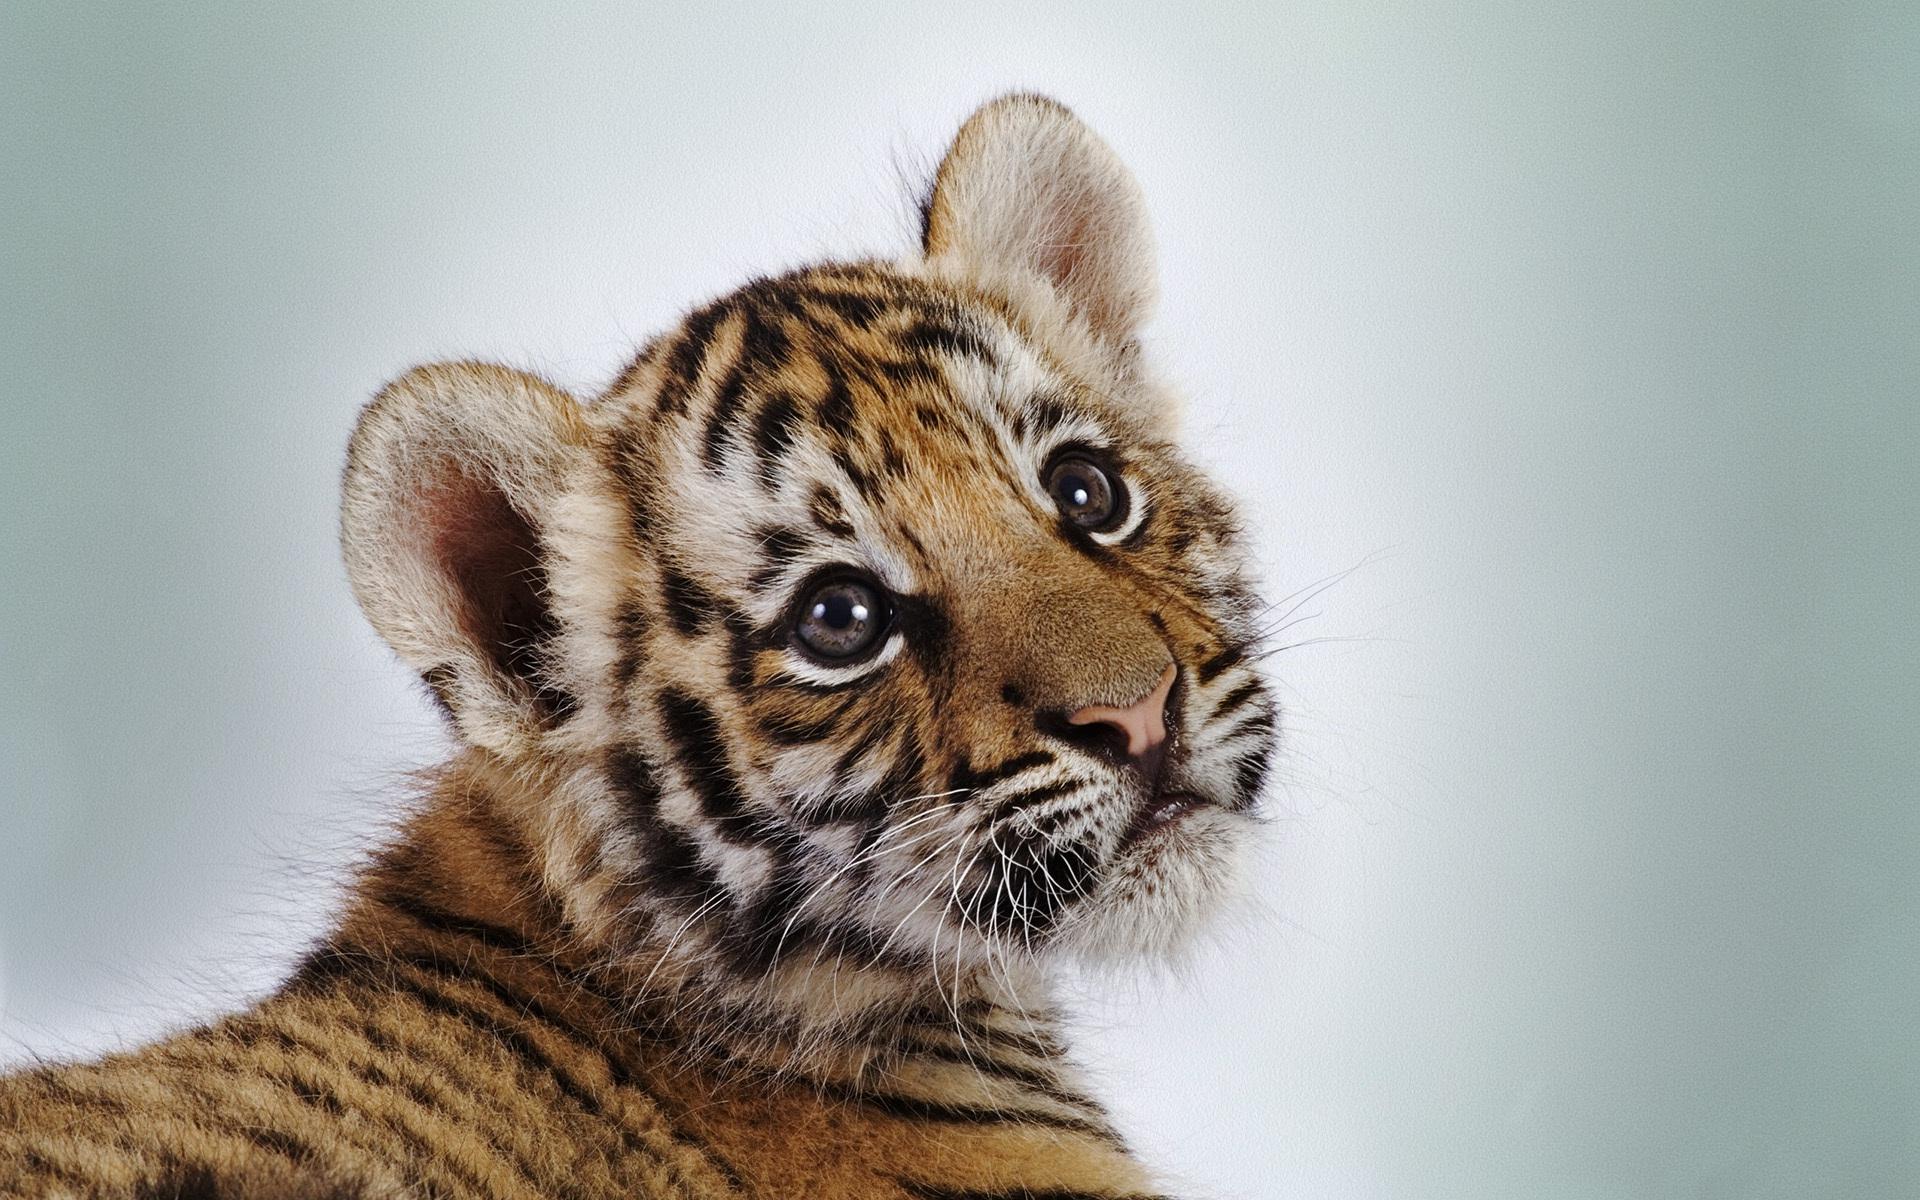 Tiger Baby Face Cute #21